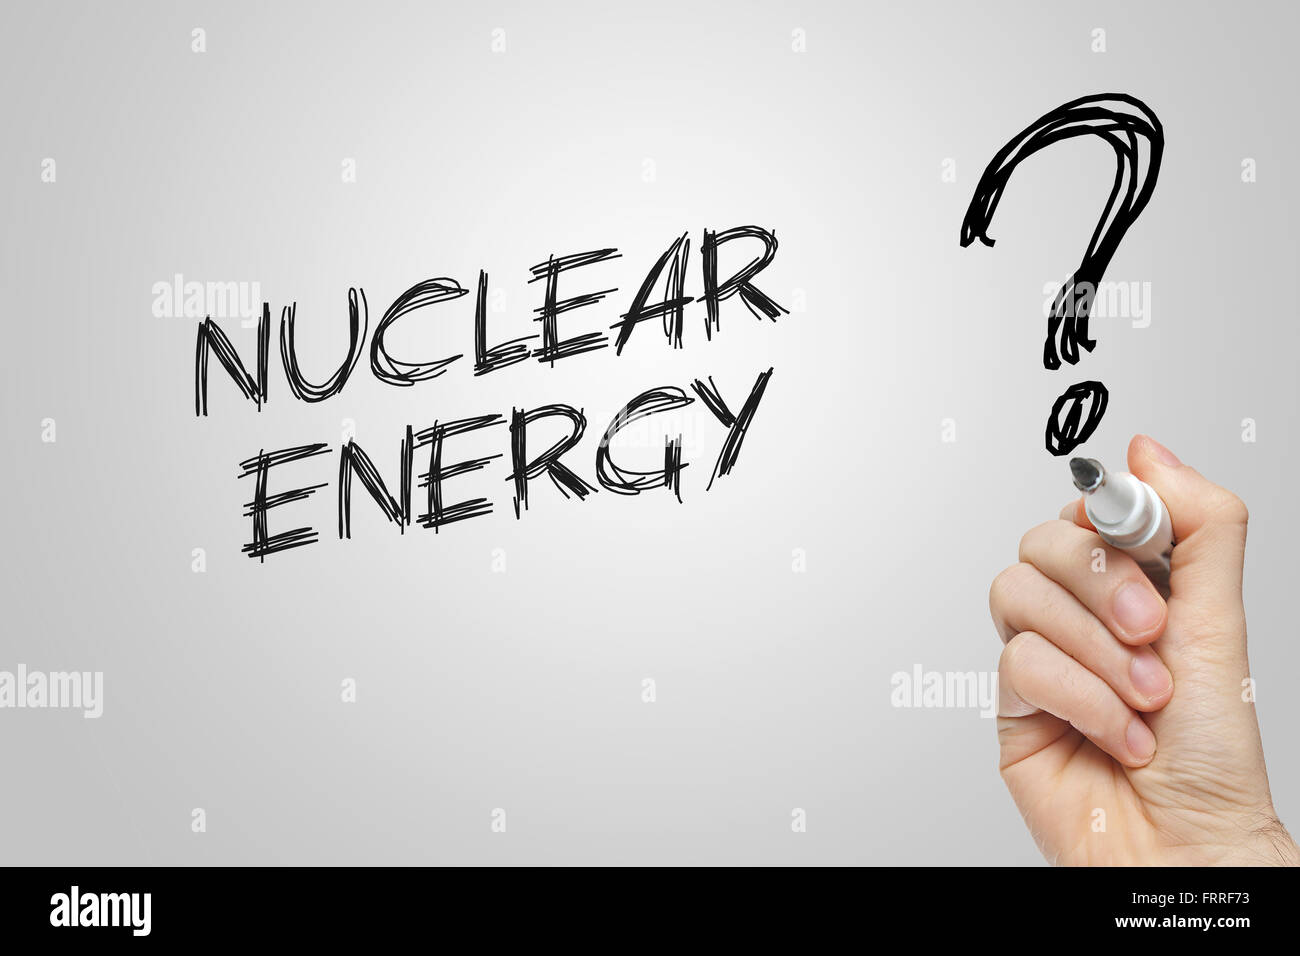 Hand writing nuclear energy on grey background Stock Photo